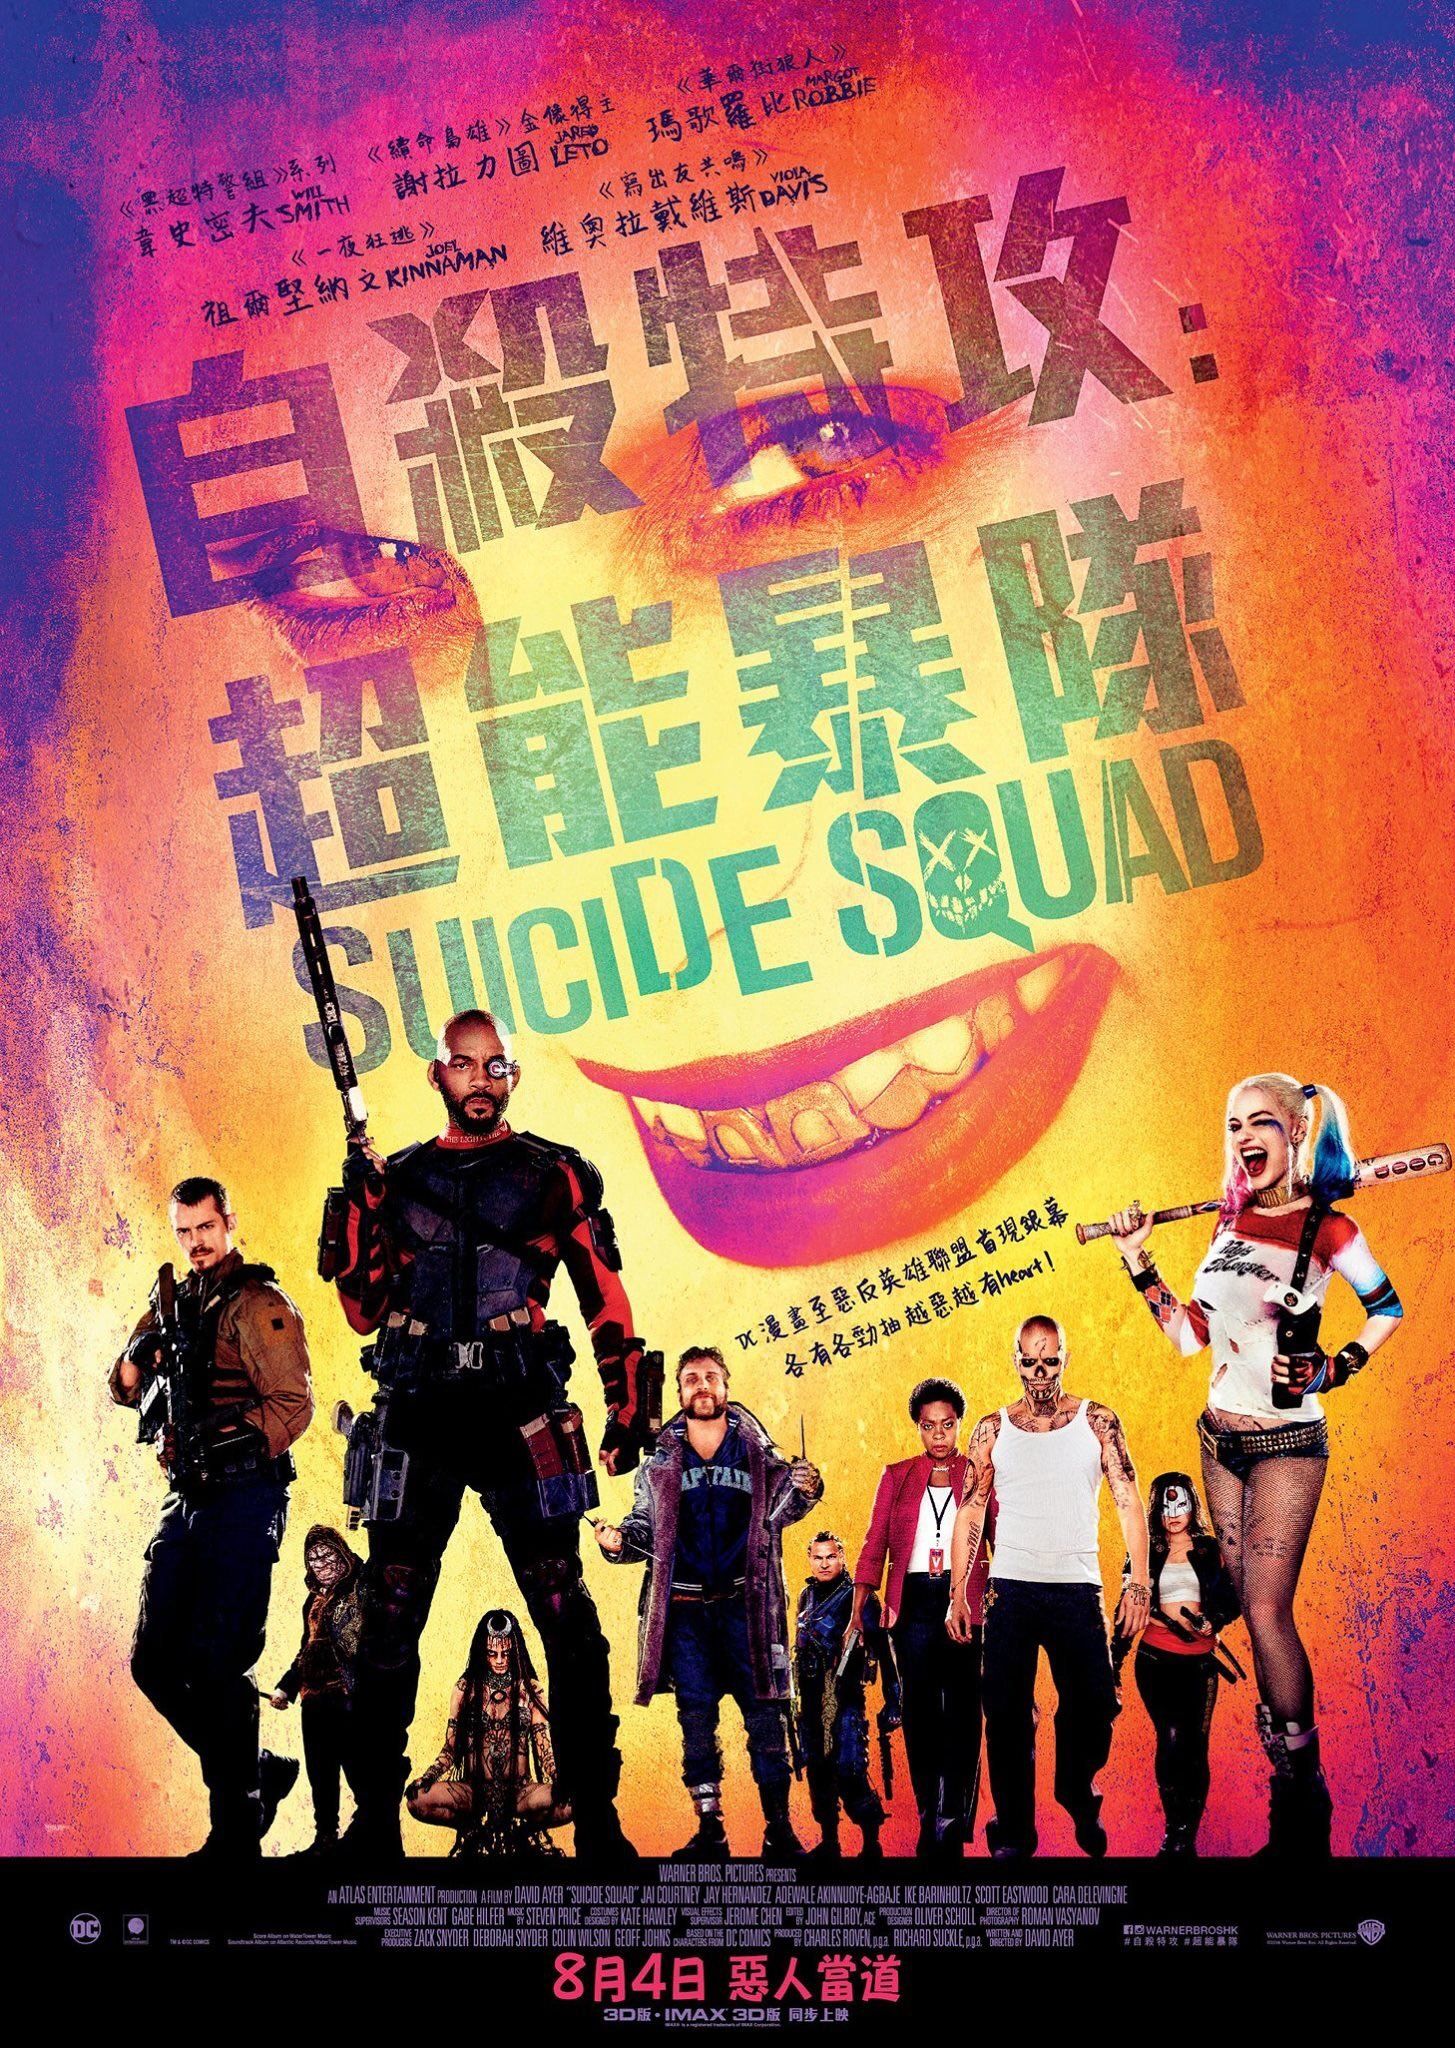 Suicide Squad International Posters Feature A Grinning Joker